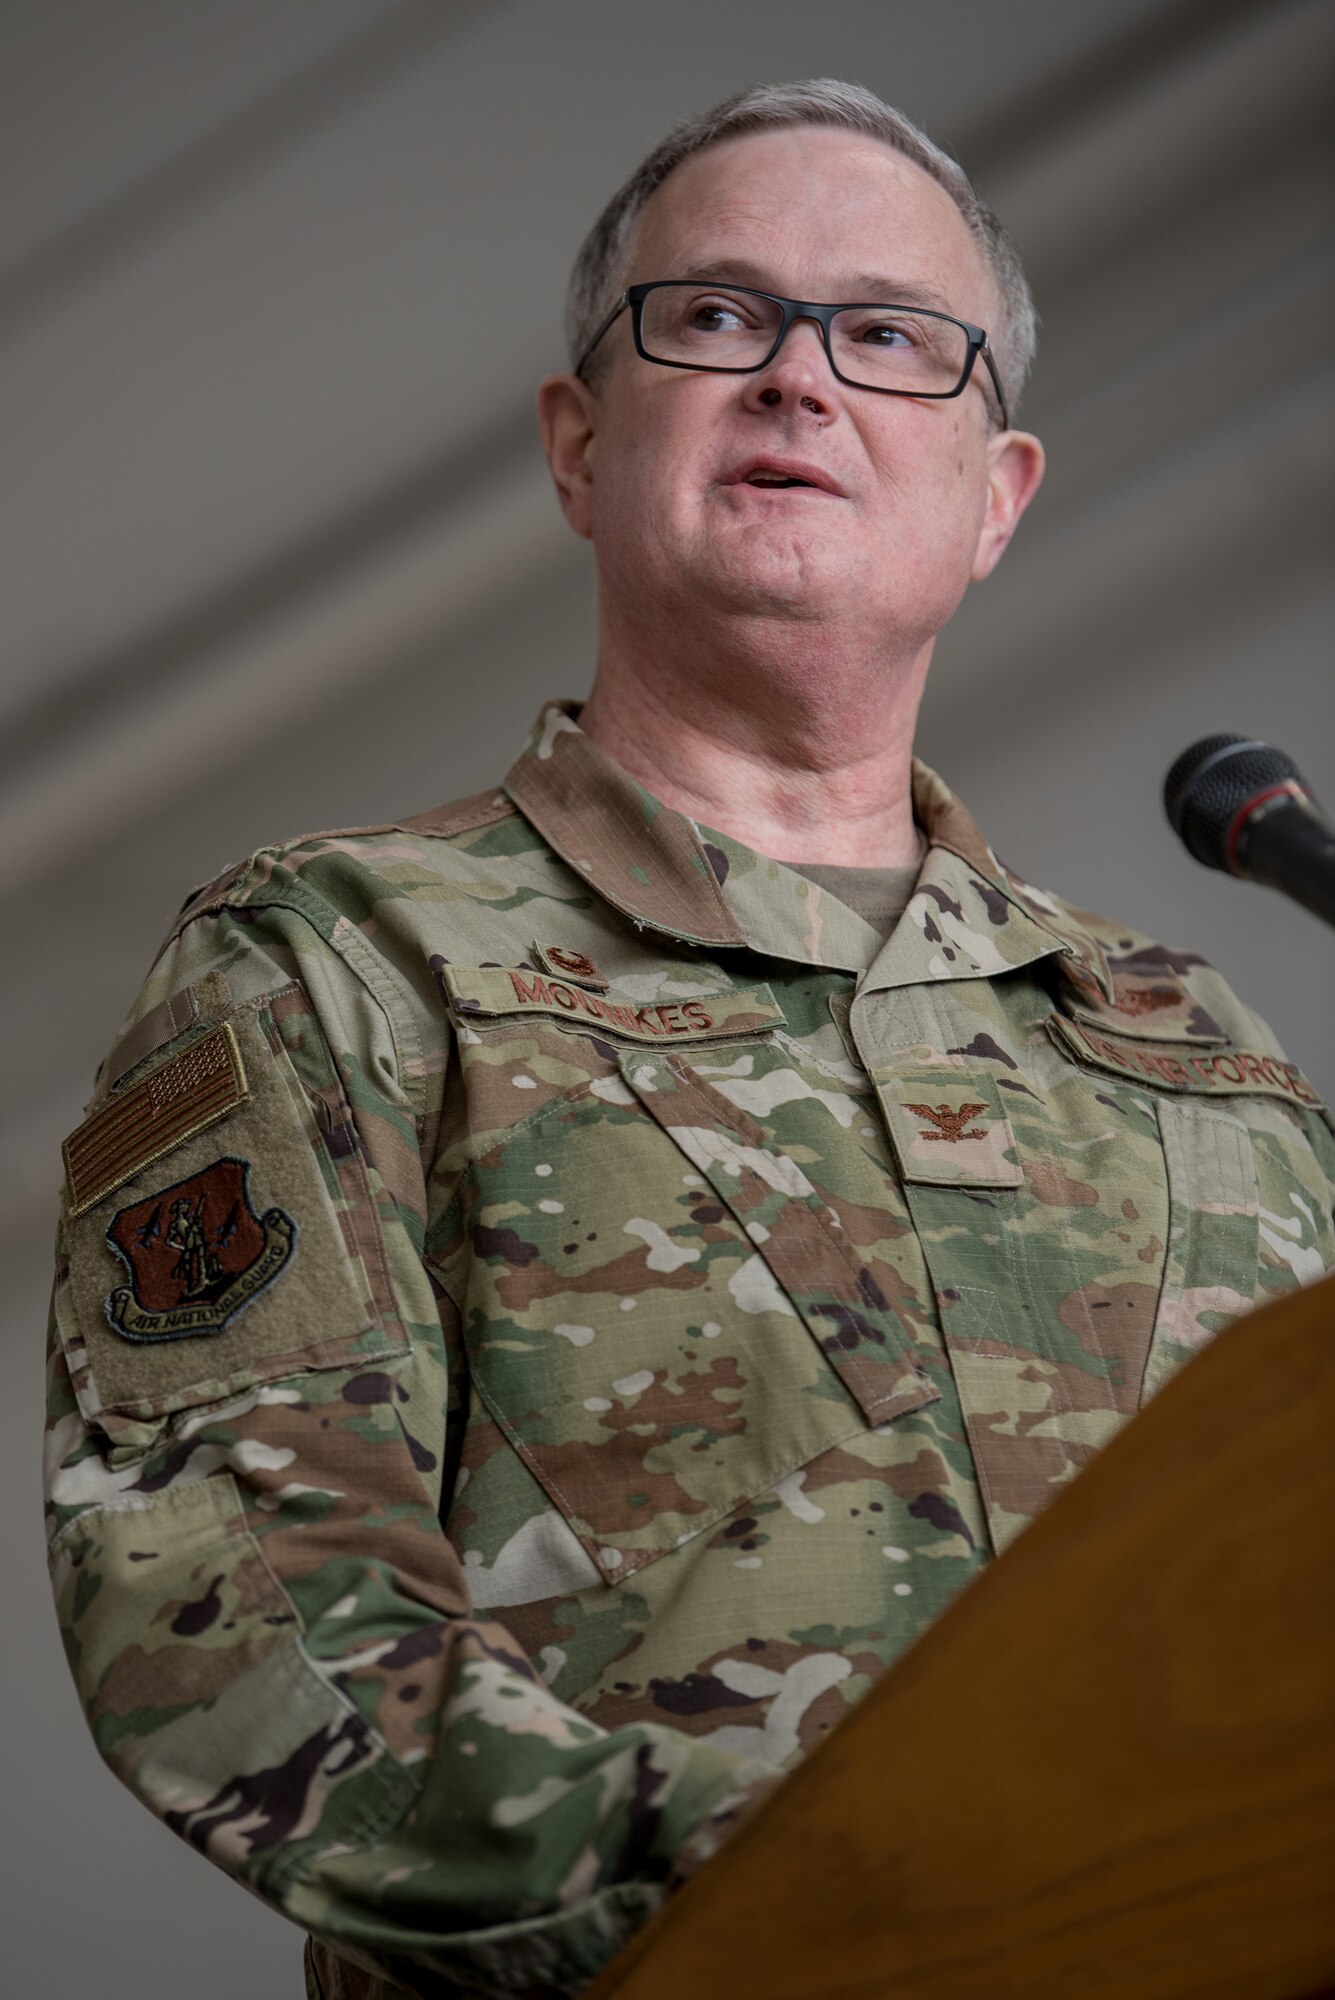 Col. David Mounkes, commander of the 123rd Airlift Wing, speaks to unit members during a ceremony at the Kentucky Air National Guard Base in Louisville, Ky., March 10, 2019. The ceremony, which highlighted the unit’s accomplishments during the past year, concluded with the presentation of the wing’s 18th Air Force Outstanding Unit Award. (U.S. Air National Guard photo by Staff Sgt. Joshua Horton)